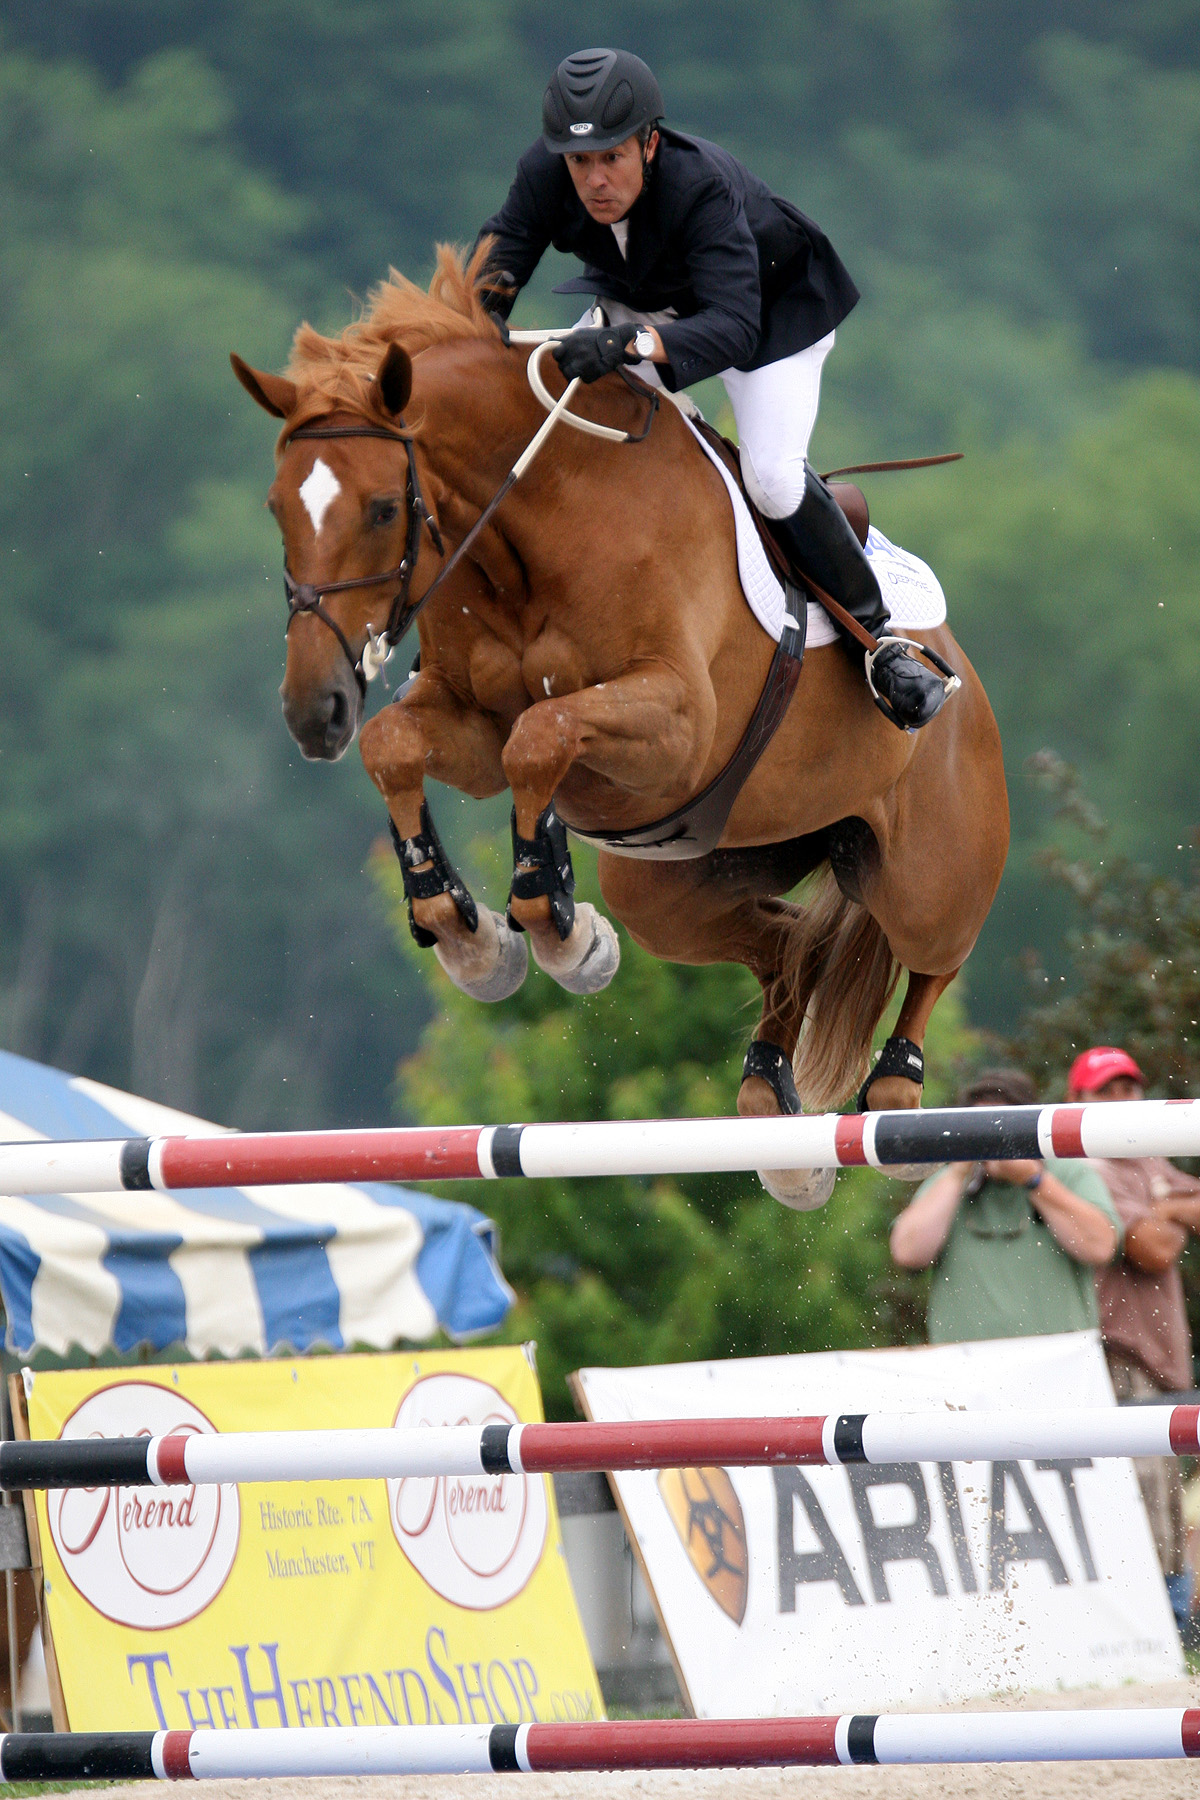 Louis Jacobs Jumps to $30,000 Otter Creek Grand Prix Victory